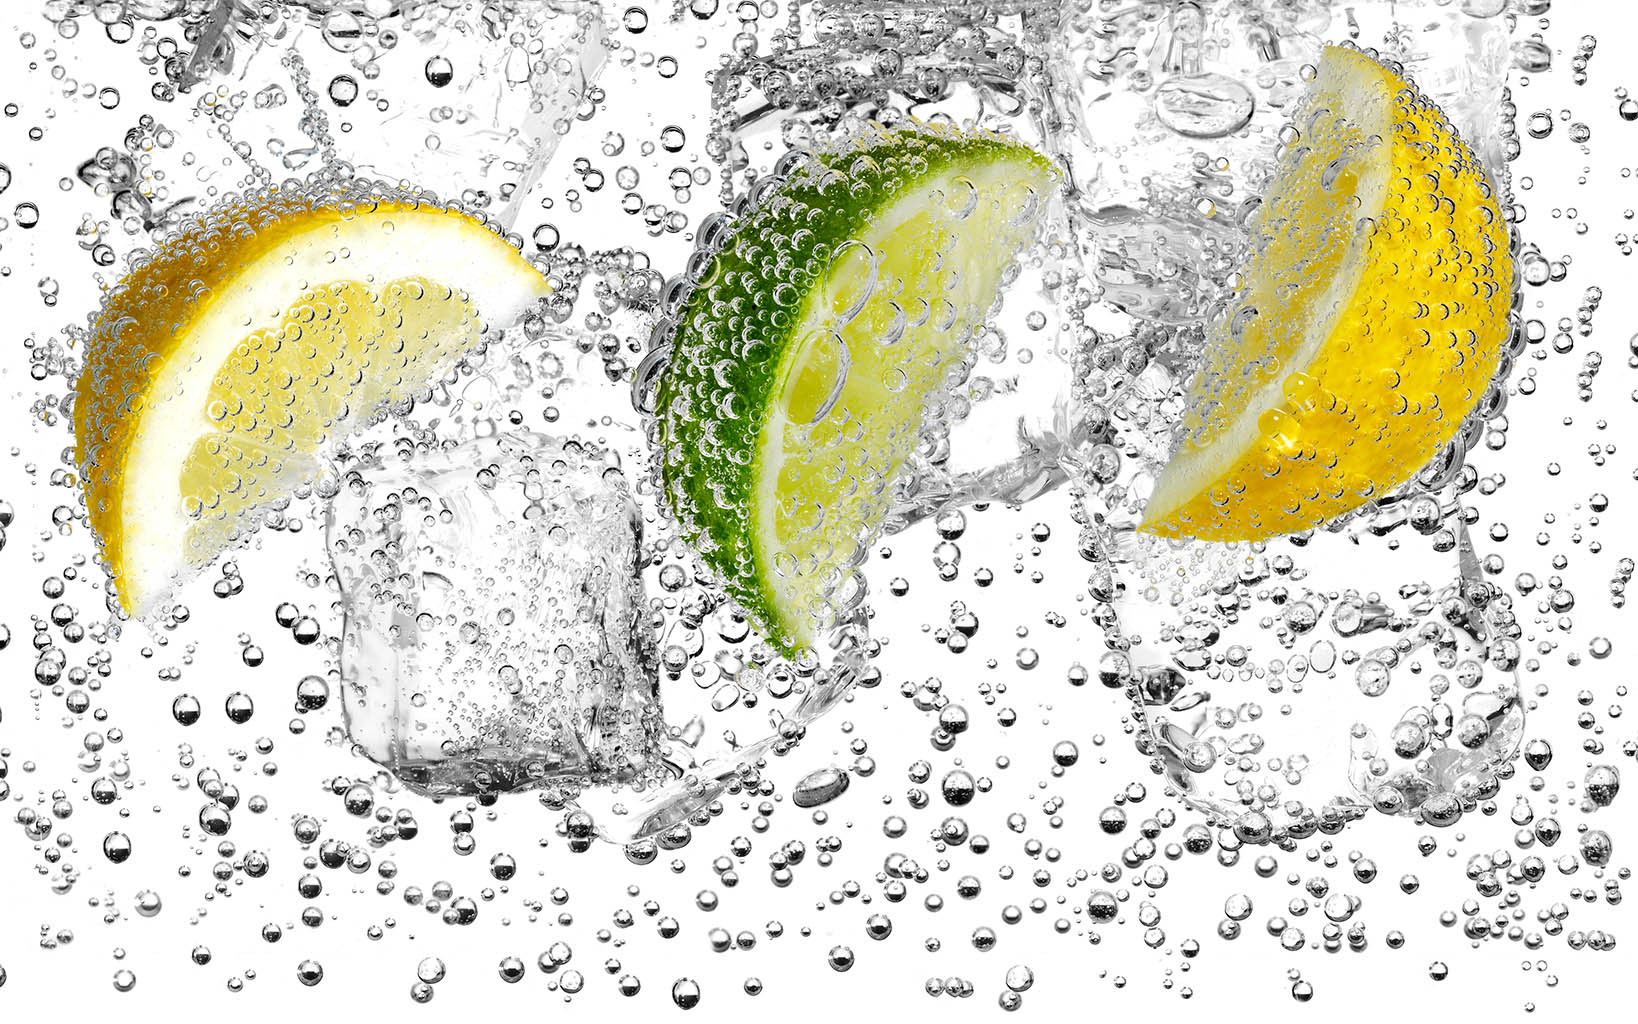 Liquid / Smoke Photography of Lemons and lime in water with ice and bubbles by Packshot Factory